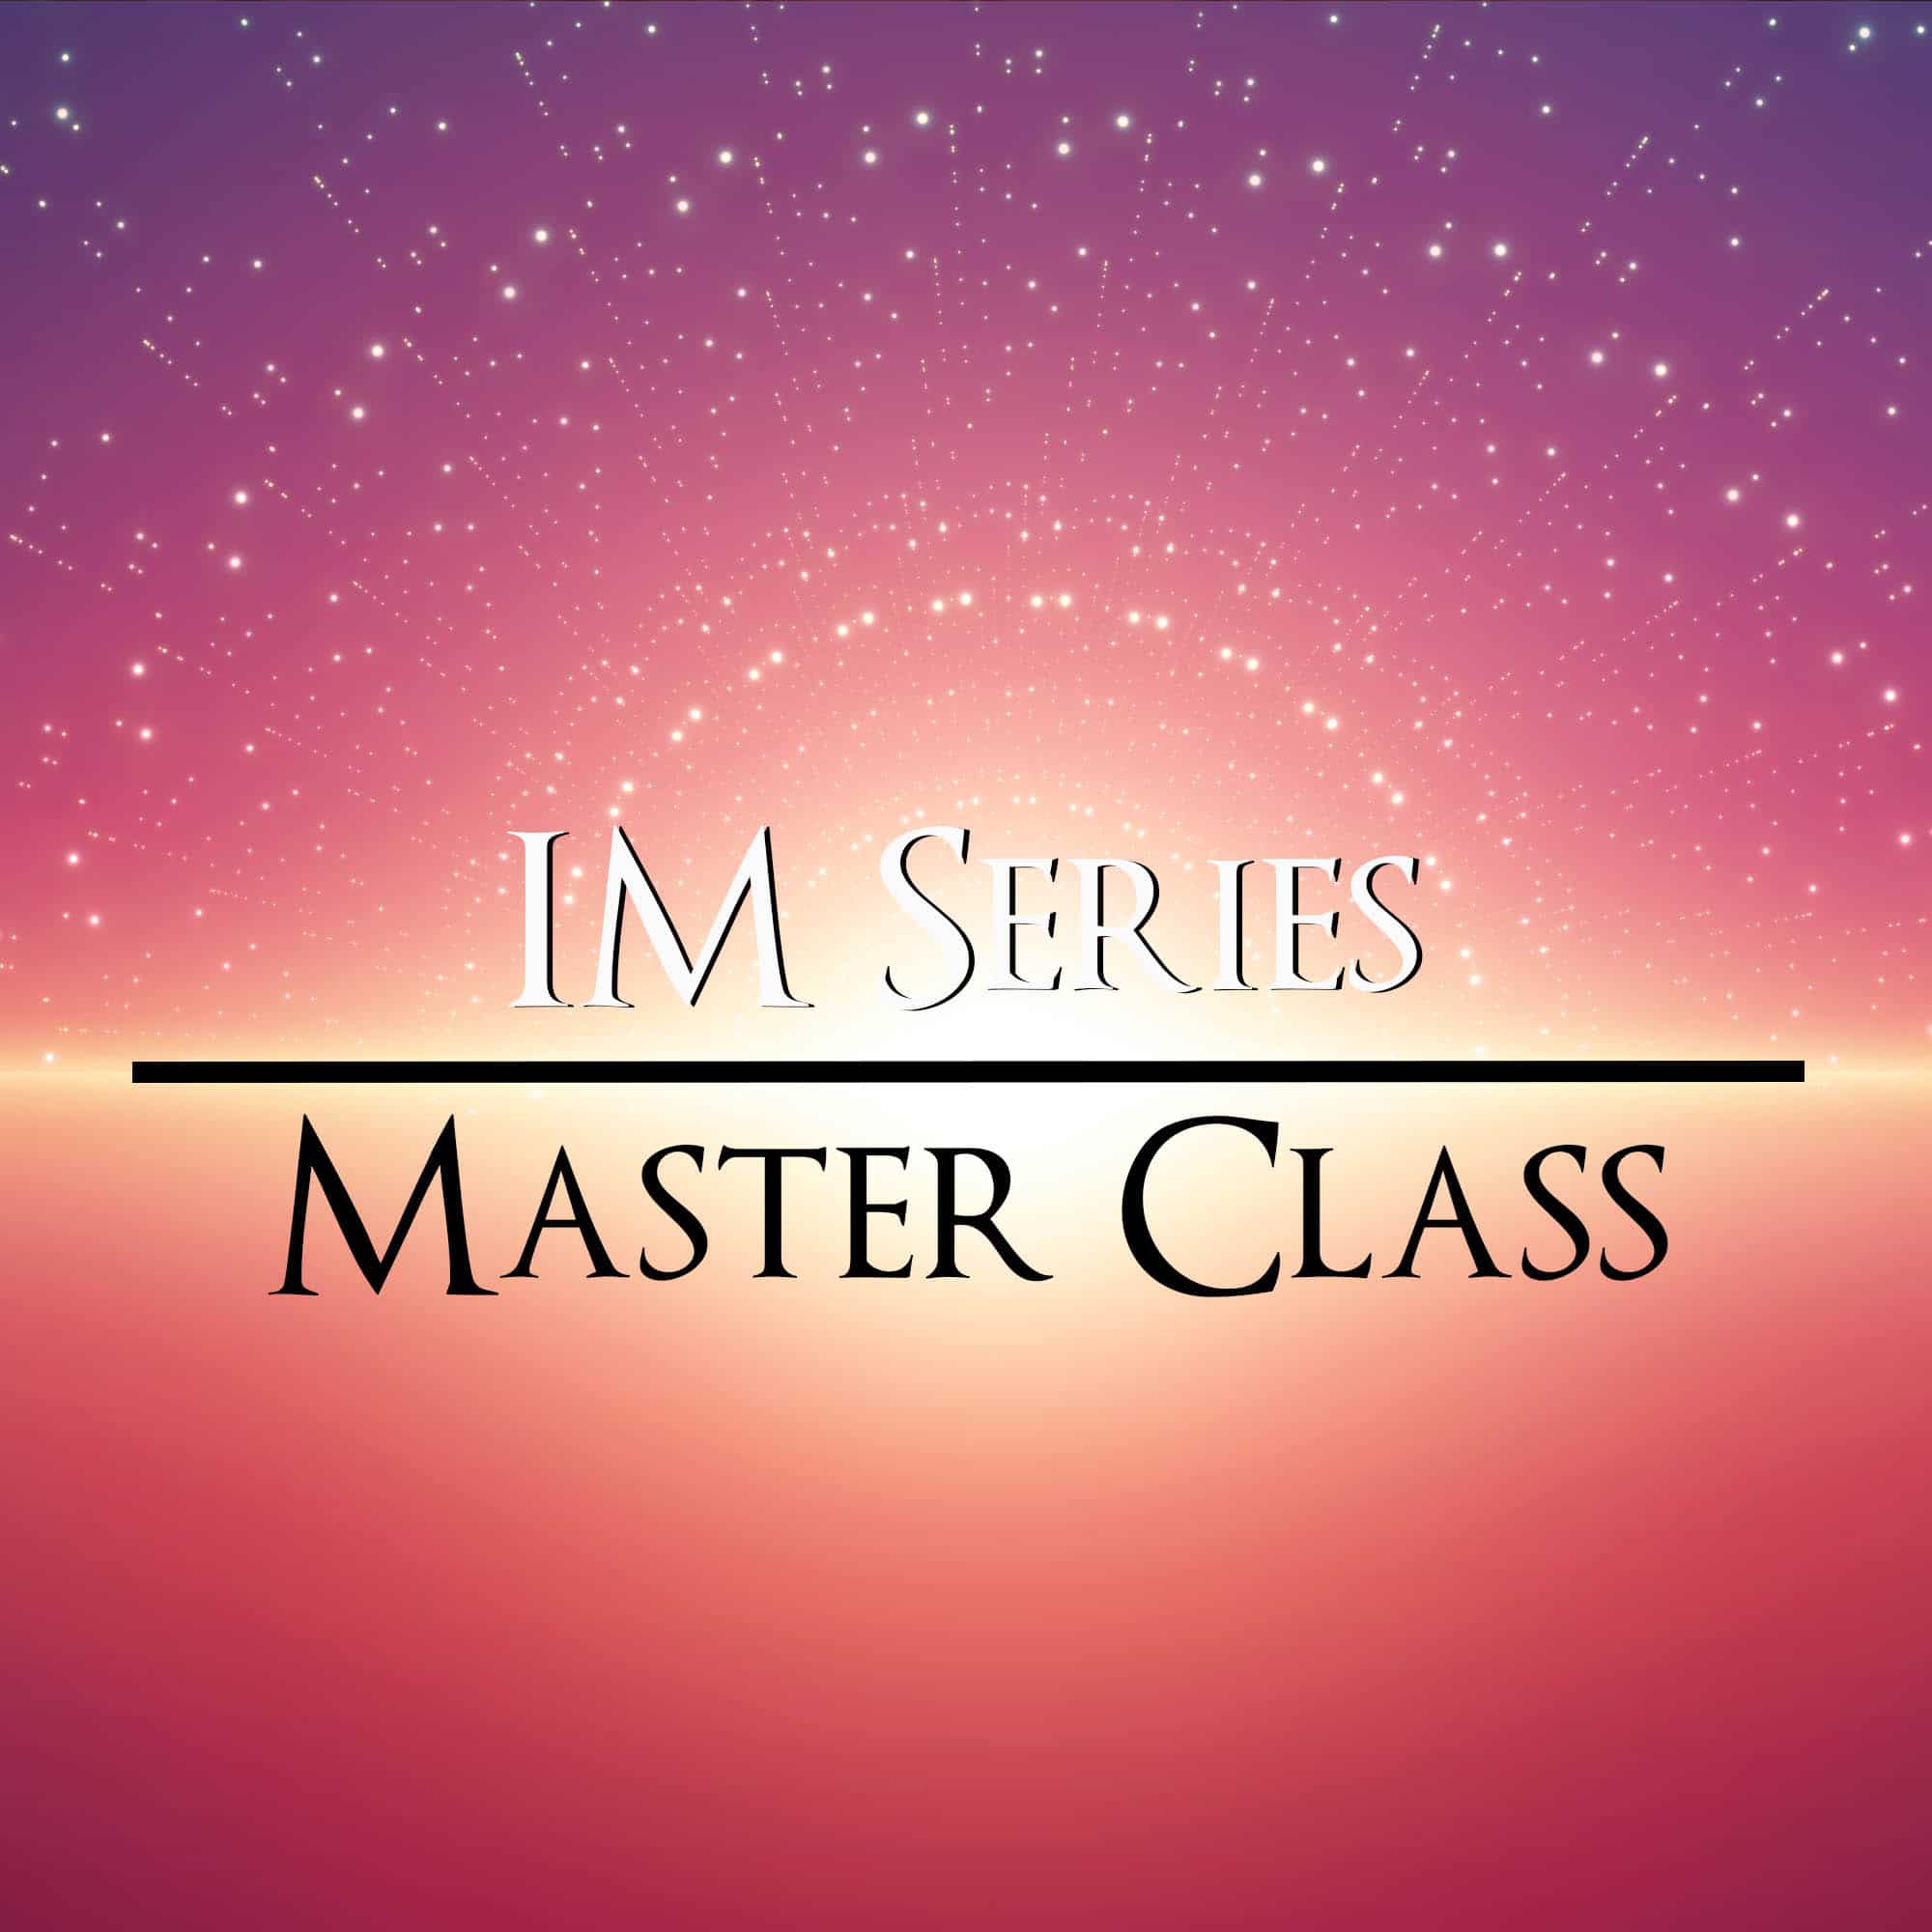 Sign up for the IM Series